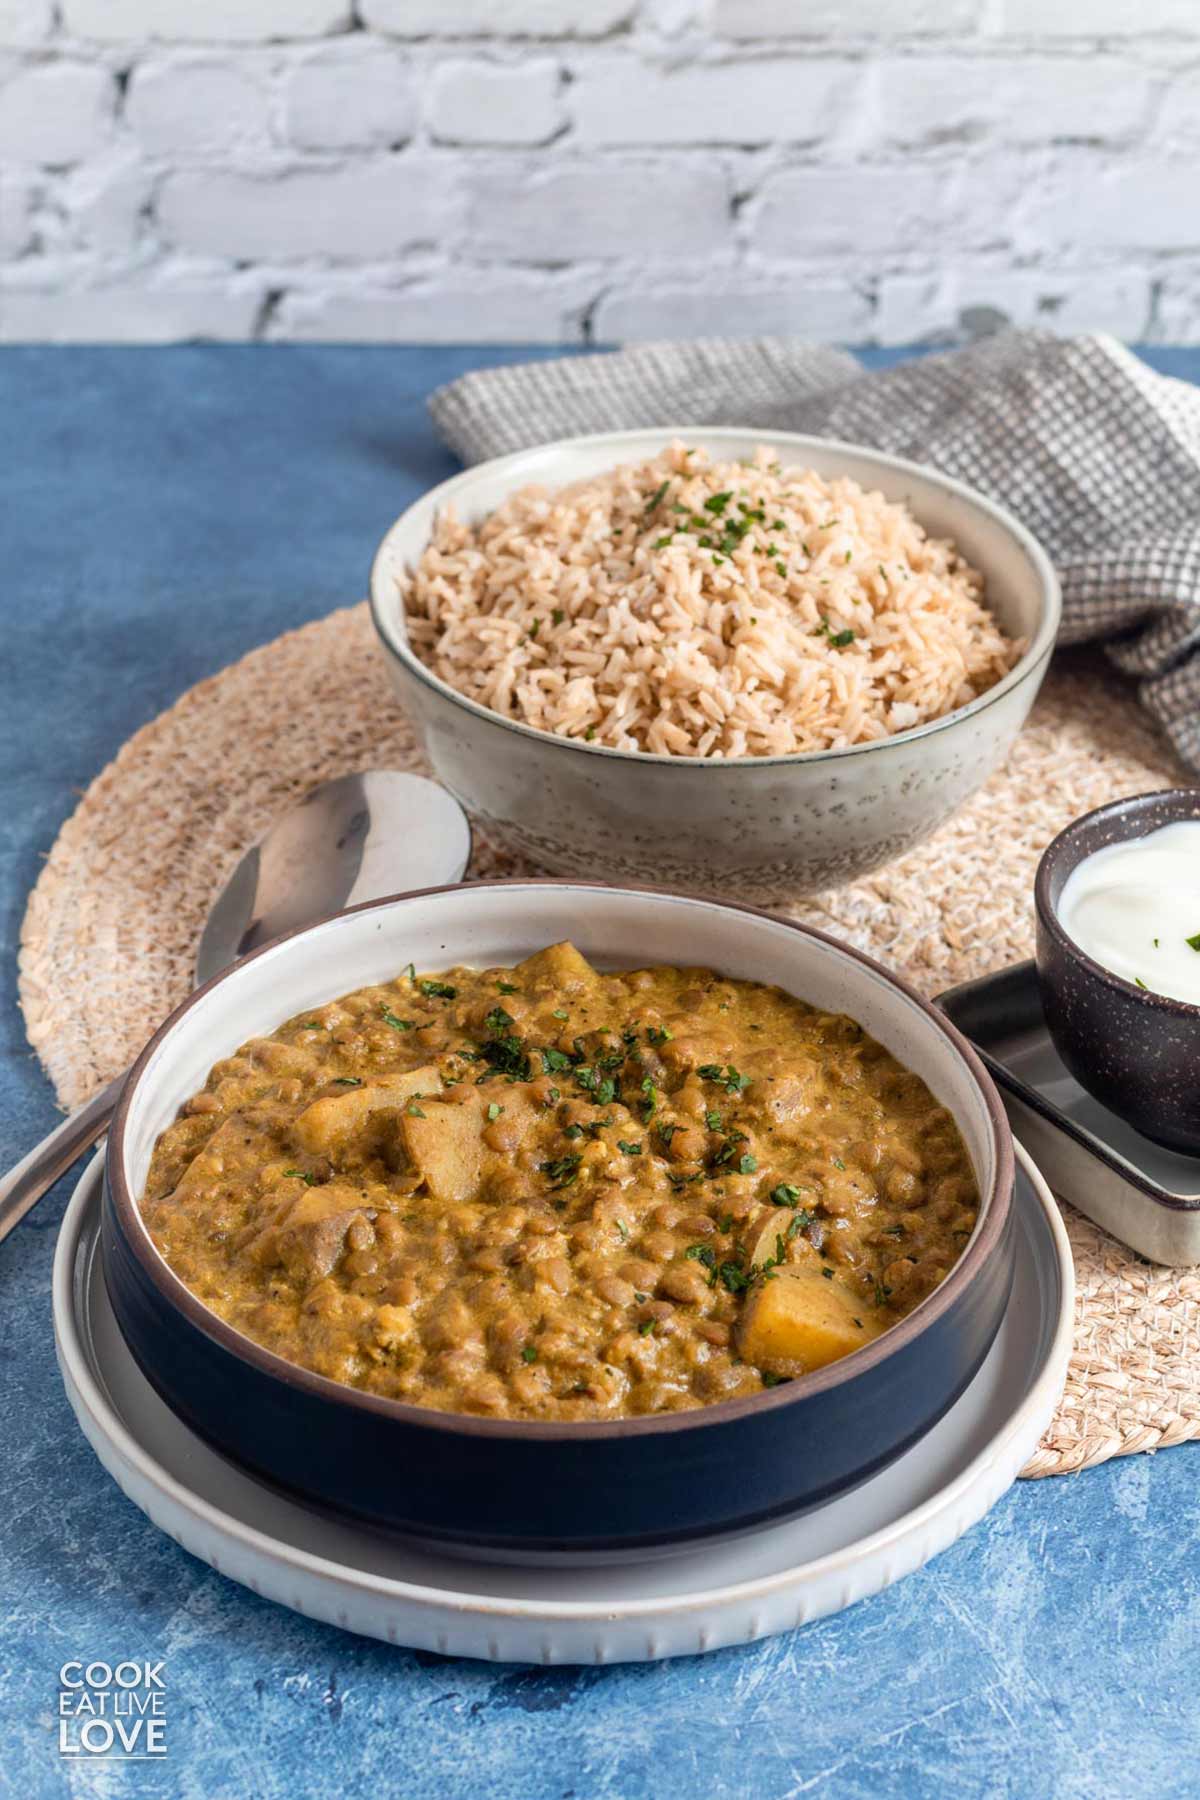 Lentil curry served up in a white bowl on the table.